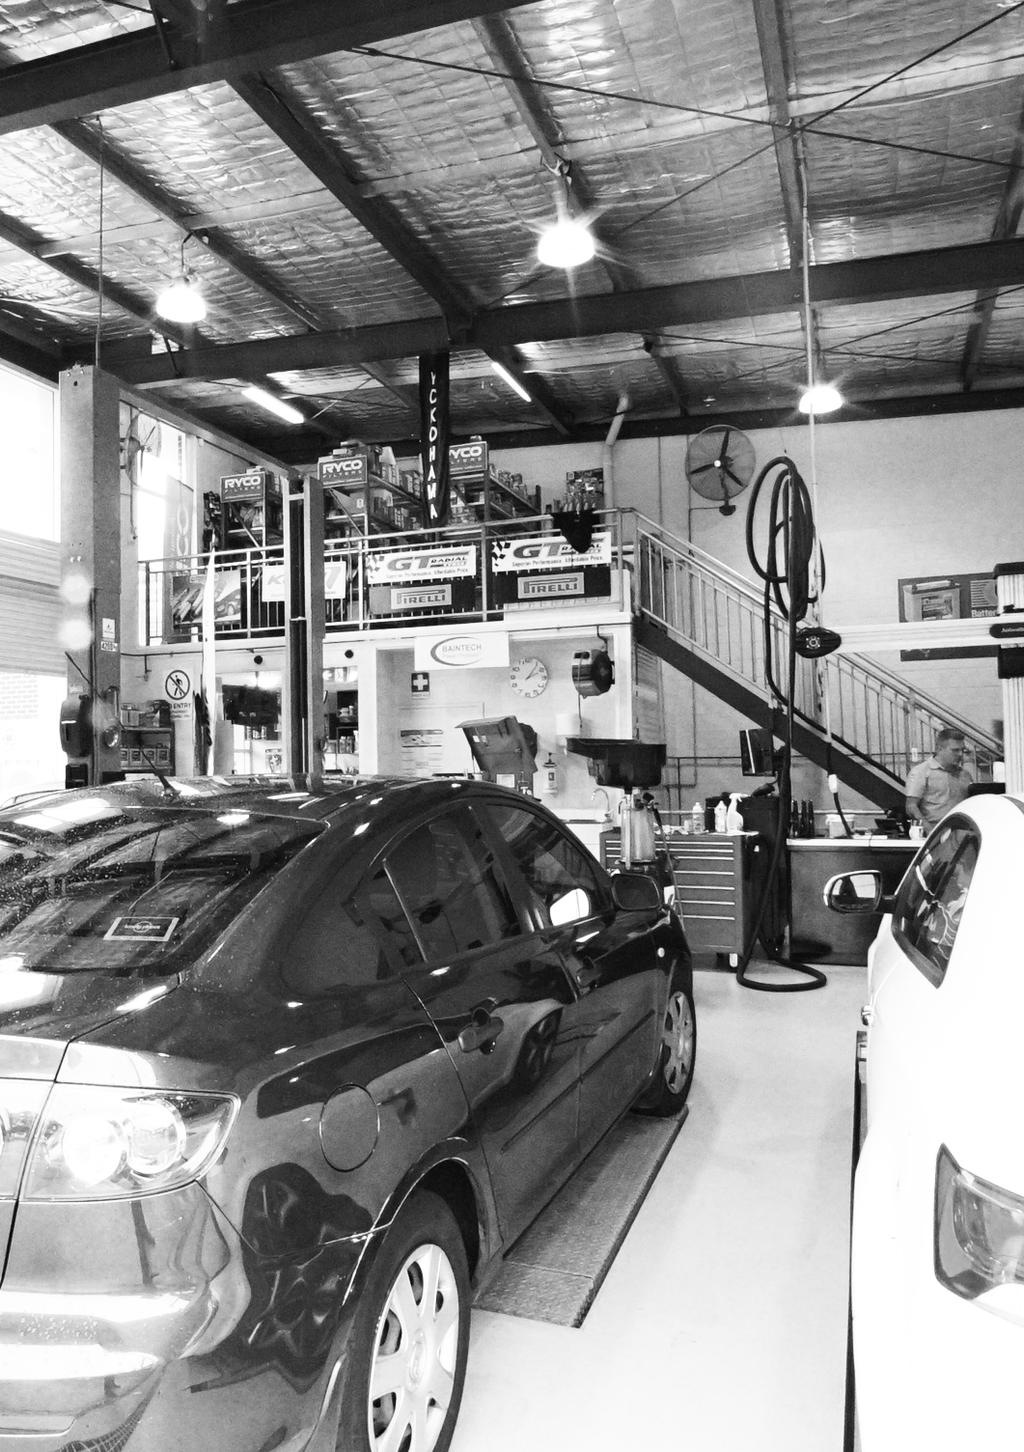 About Capricorn Risk Services Capricorn was formed over 40 years ago to support businesses in the automotive industry.